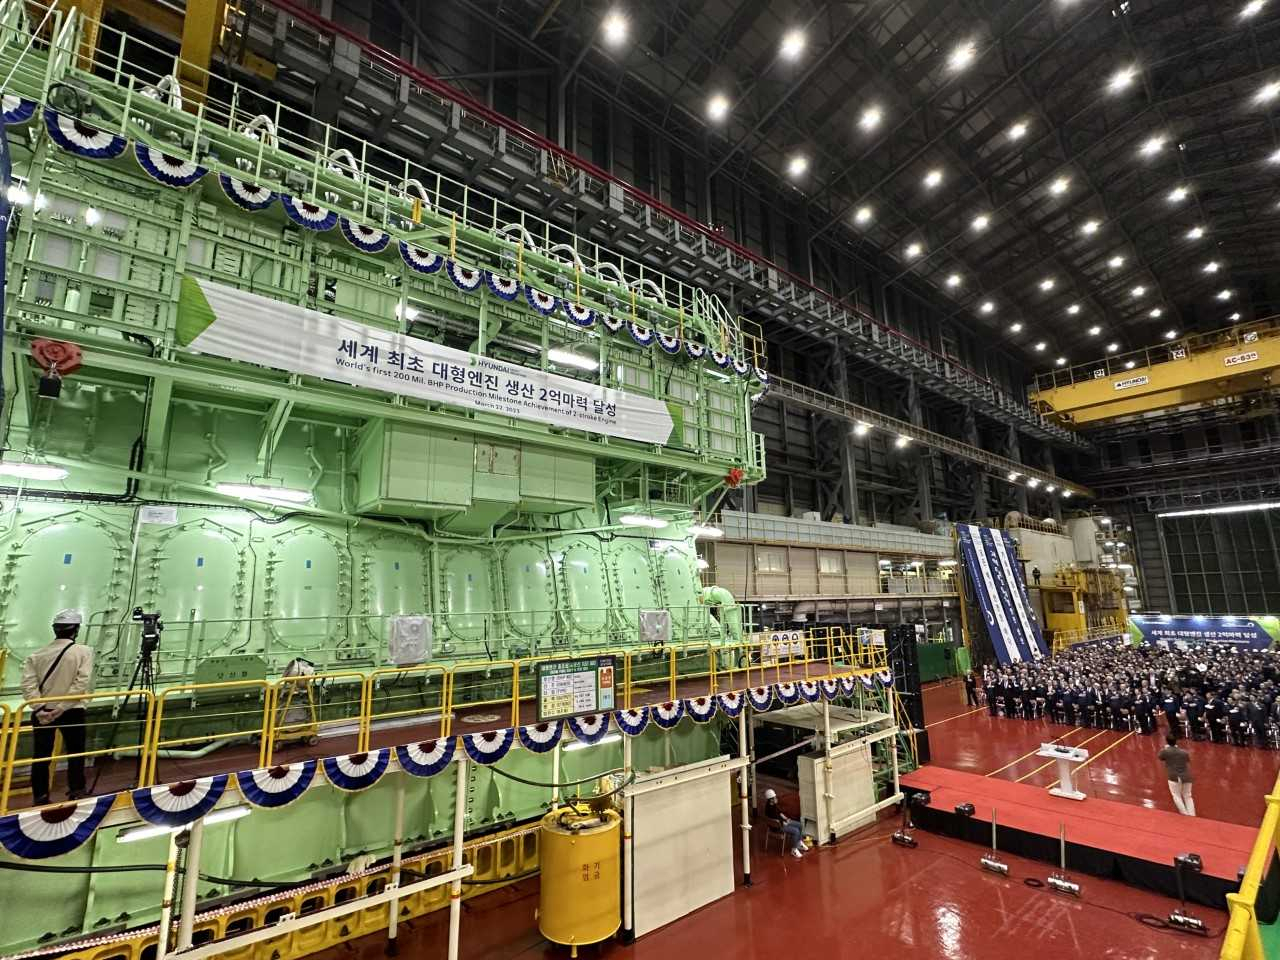 Hyundai Heavy Industries holds a ceremony to mark its engine production milestone of 200 million horsepower at its engine production plant in Ulsan on Wednesday. On the left is the company's 74,720-horsepower large vessel engine. (HD Hyundai)